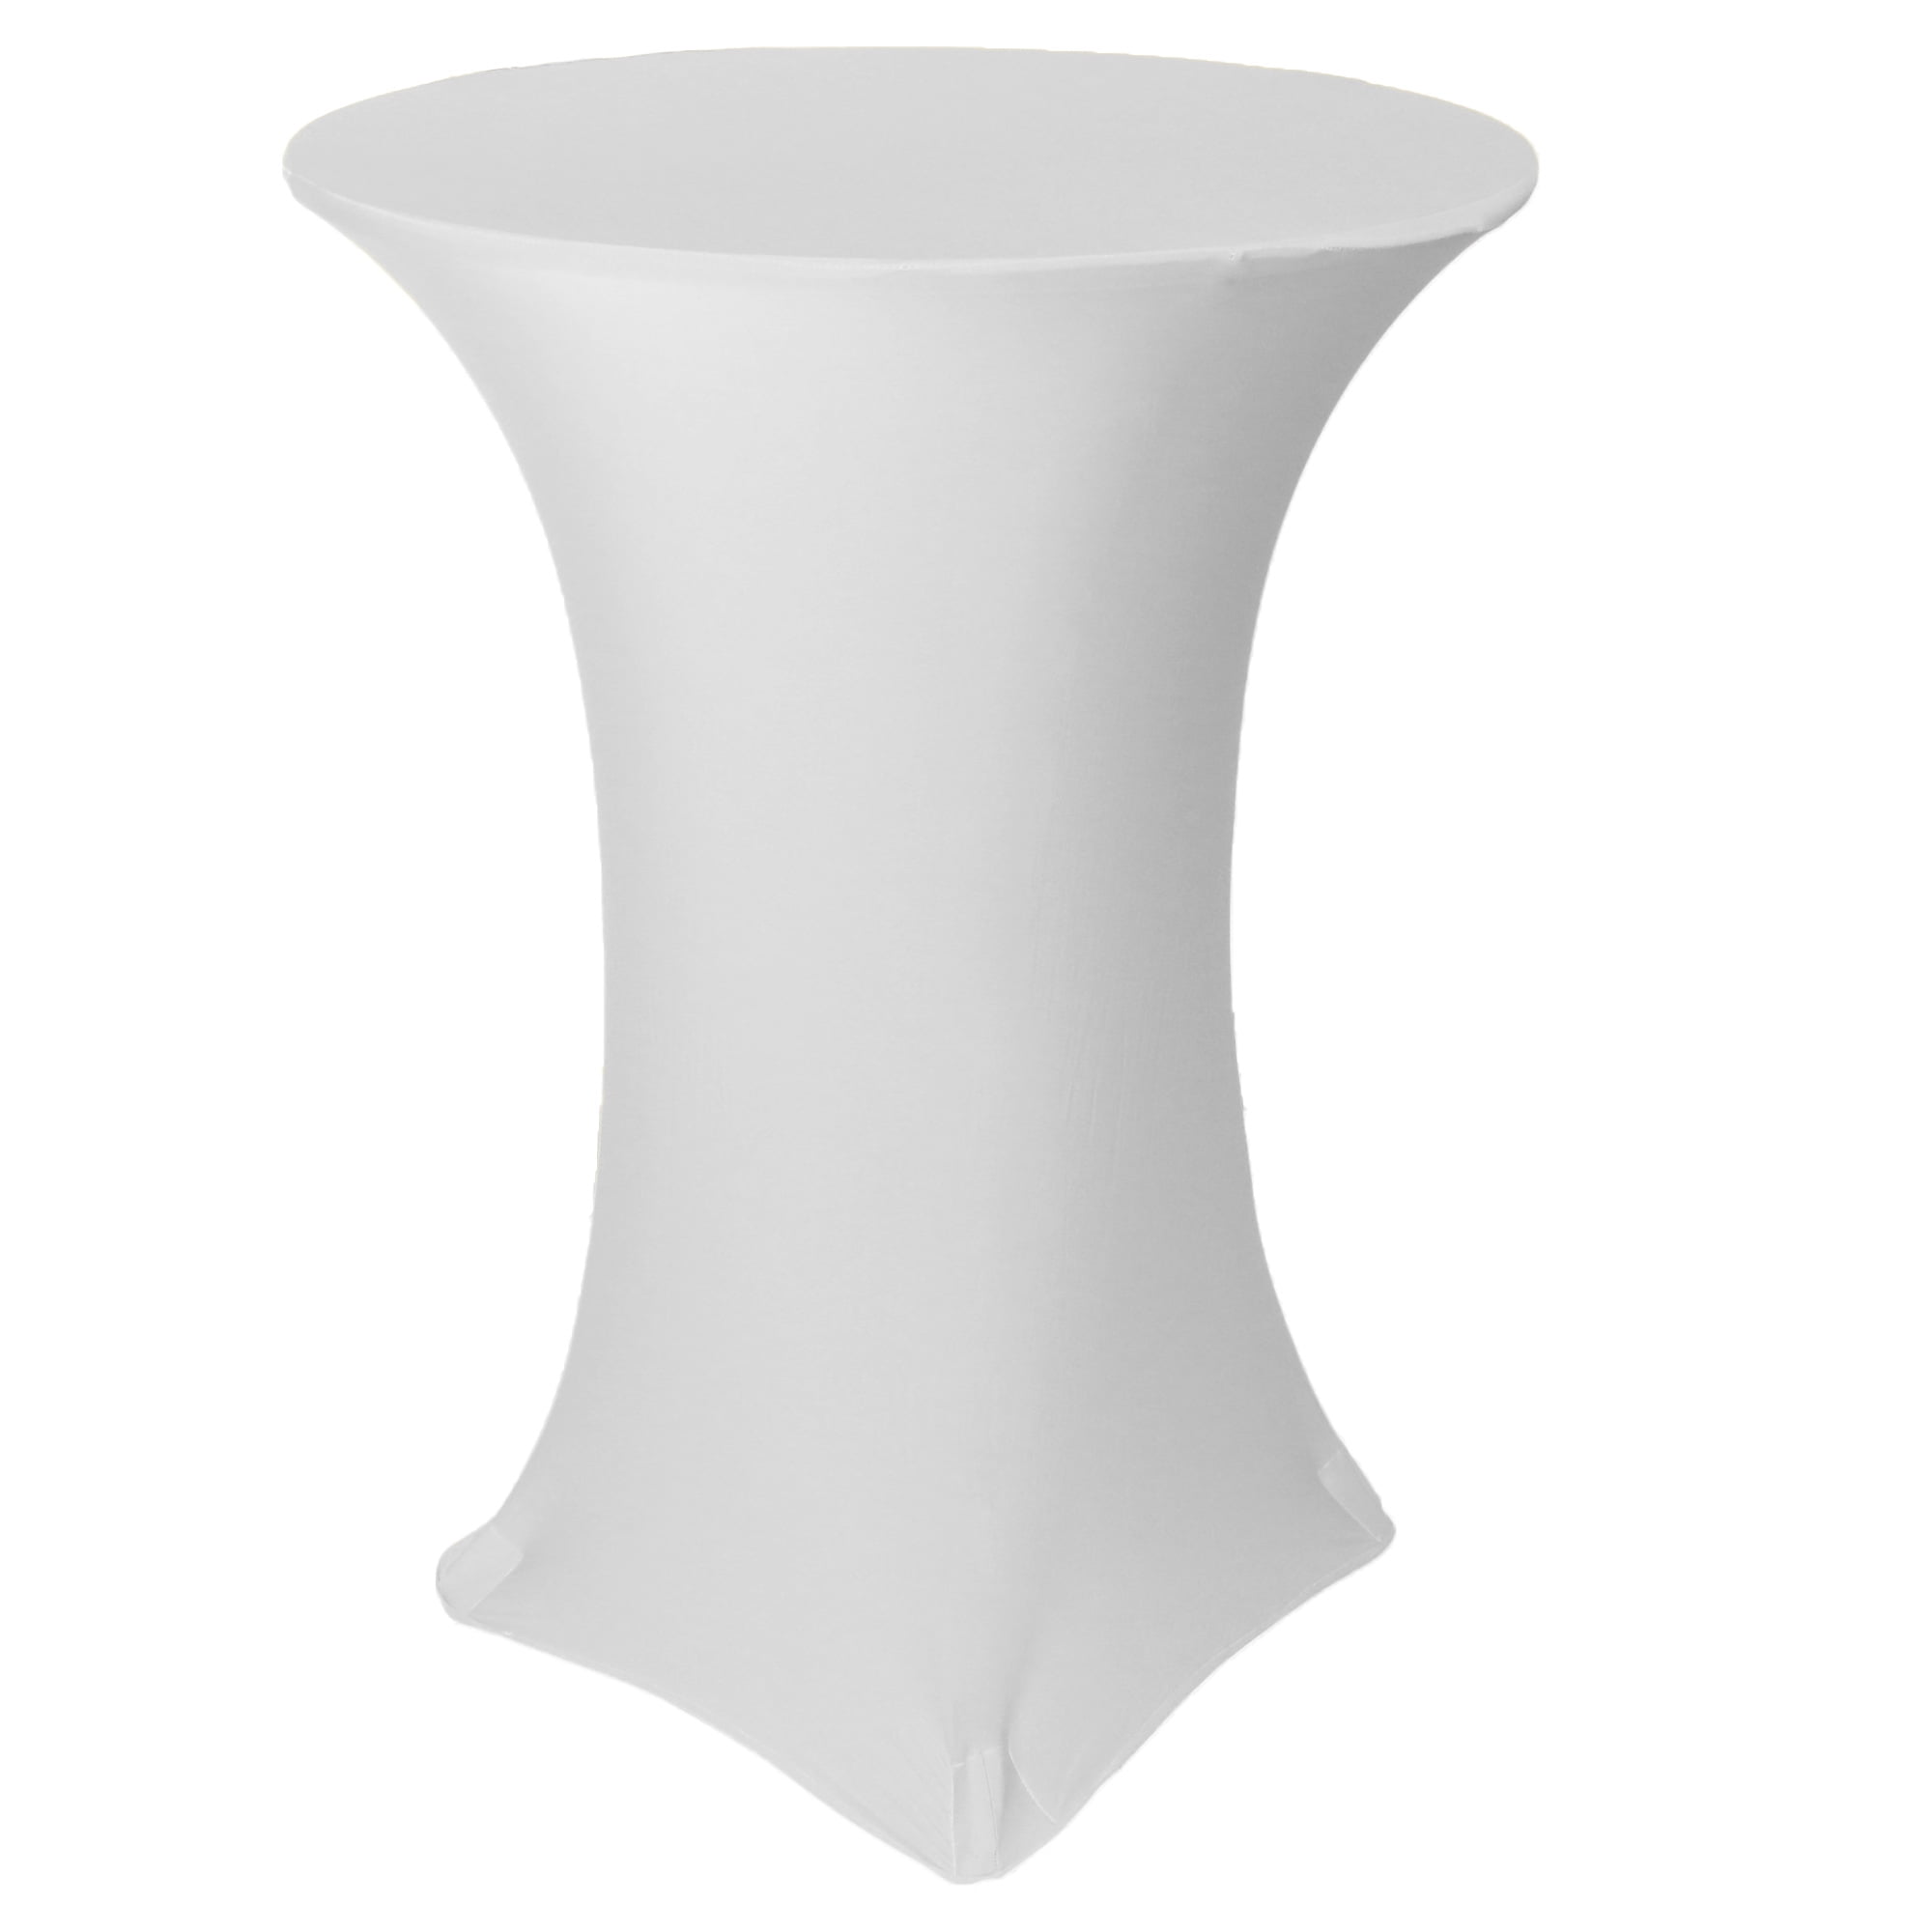 32 Inch Highboy Tail Round Stretch, White Round Spandex Table Covers